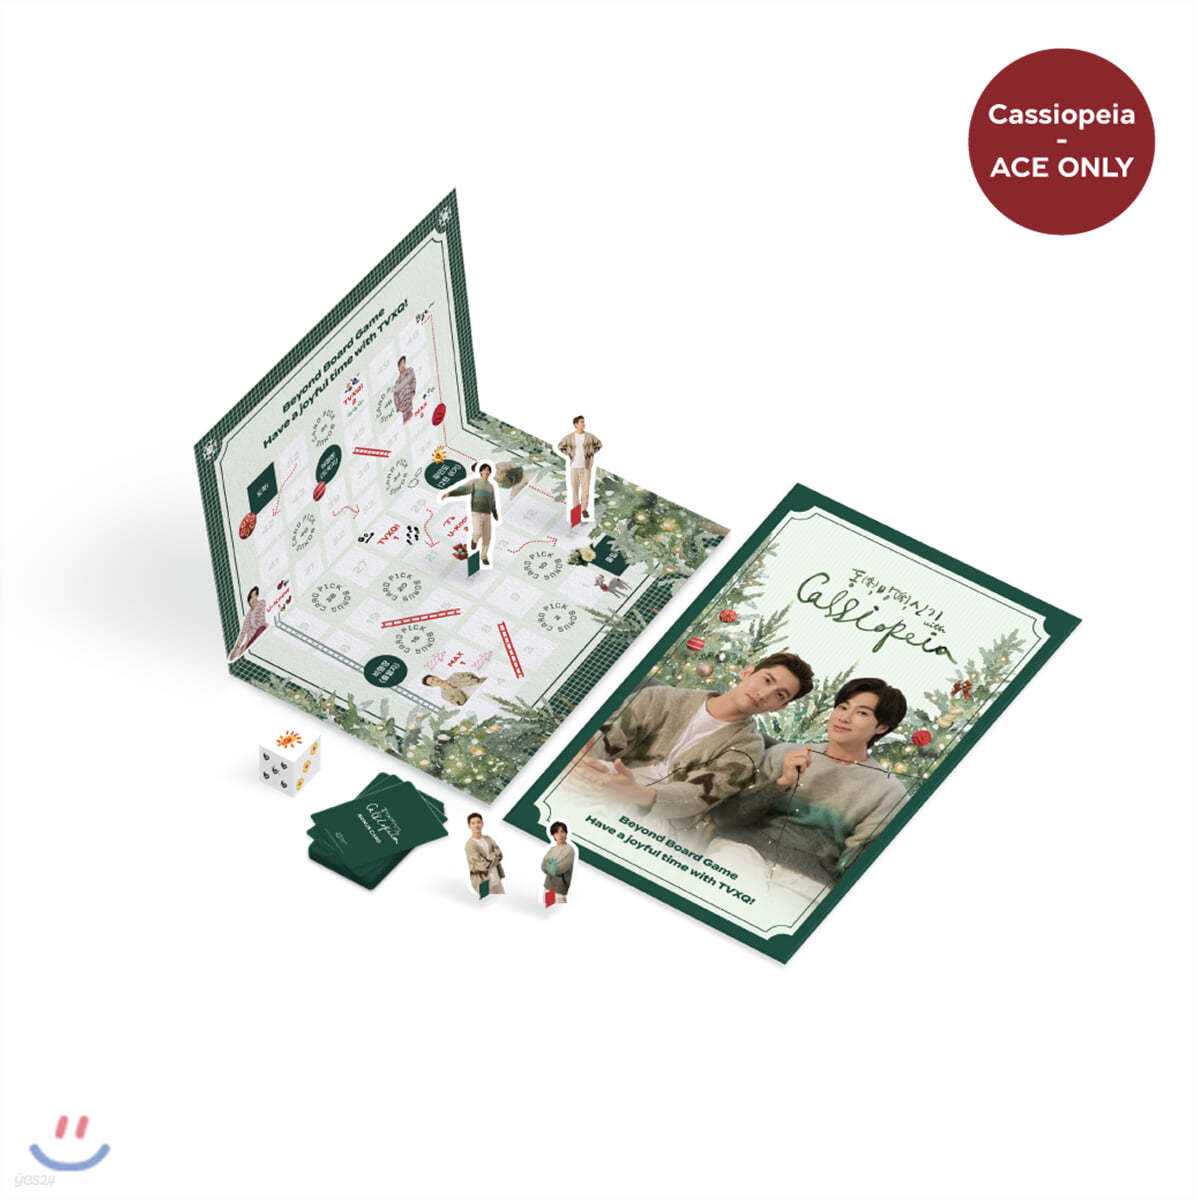 [CASSIOPEIA ACE ONLY] TVXQ! Beyond Board Game 2020 TVXQ! ONLINE FANMEETING 동(冬),방(房),신기 with Cassiopeia